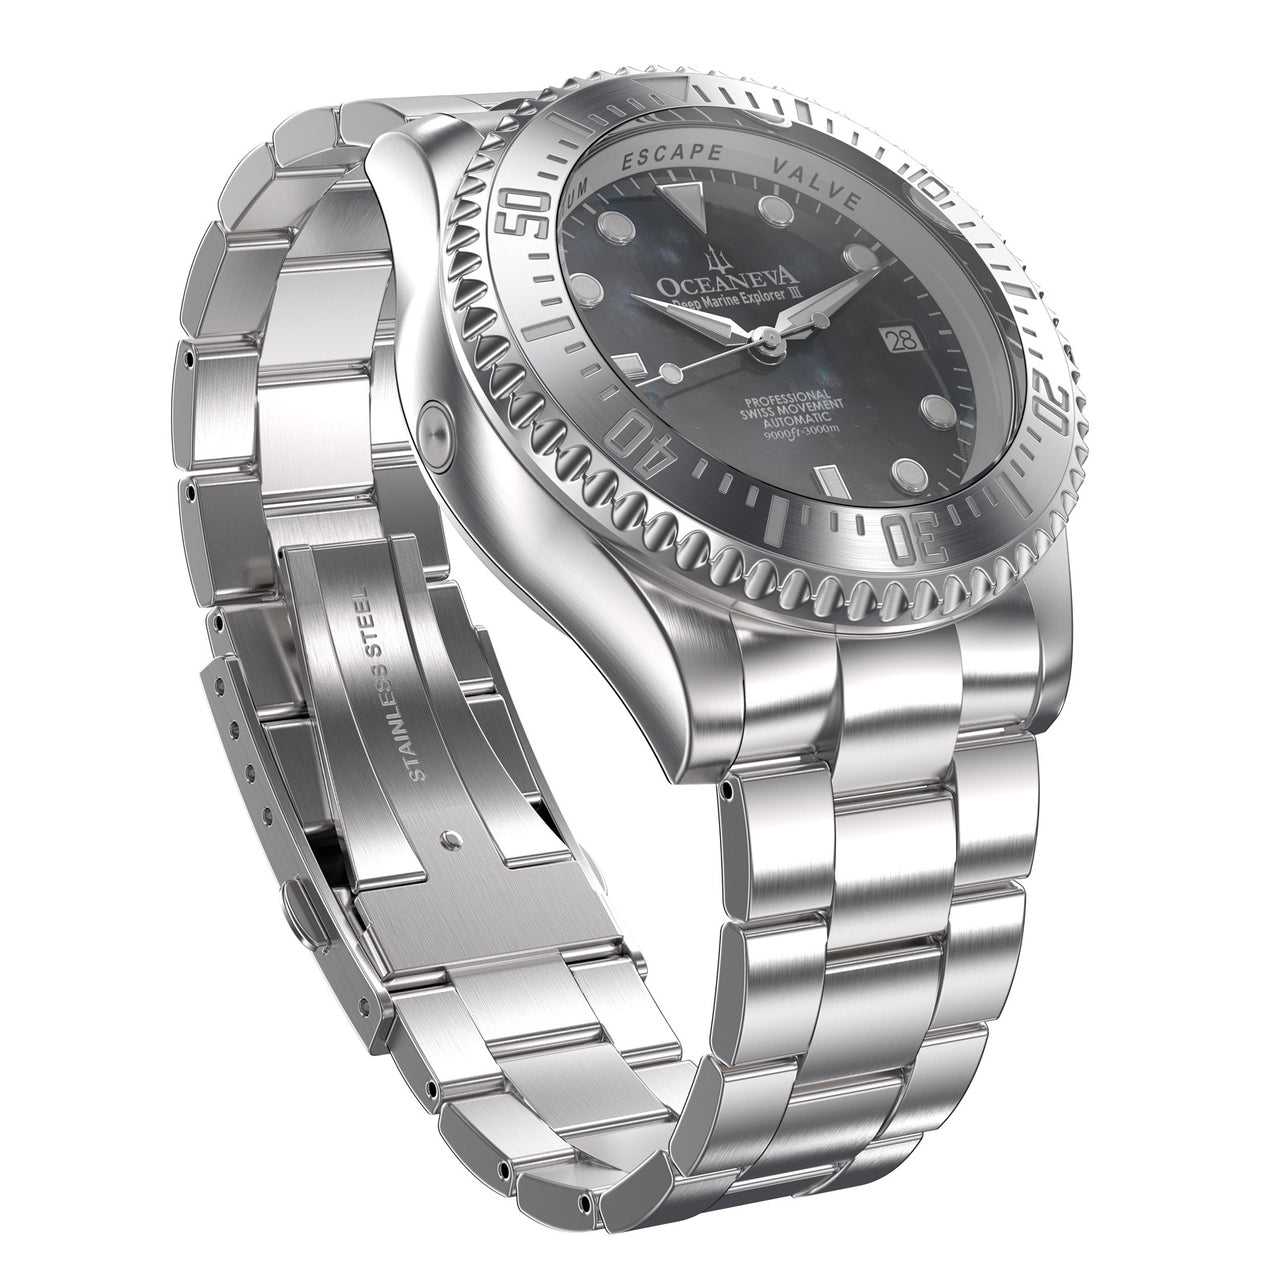 Oceaneva 3000M Dive Watch Gun Metal Gray Mother of Pearl Stainless Front Picture Slight Right Slant View